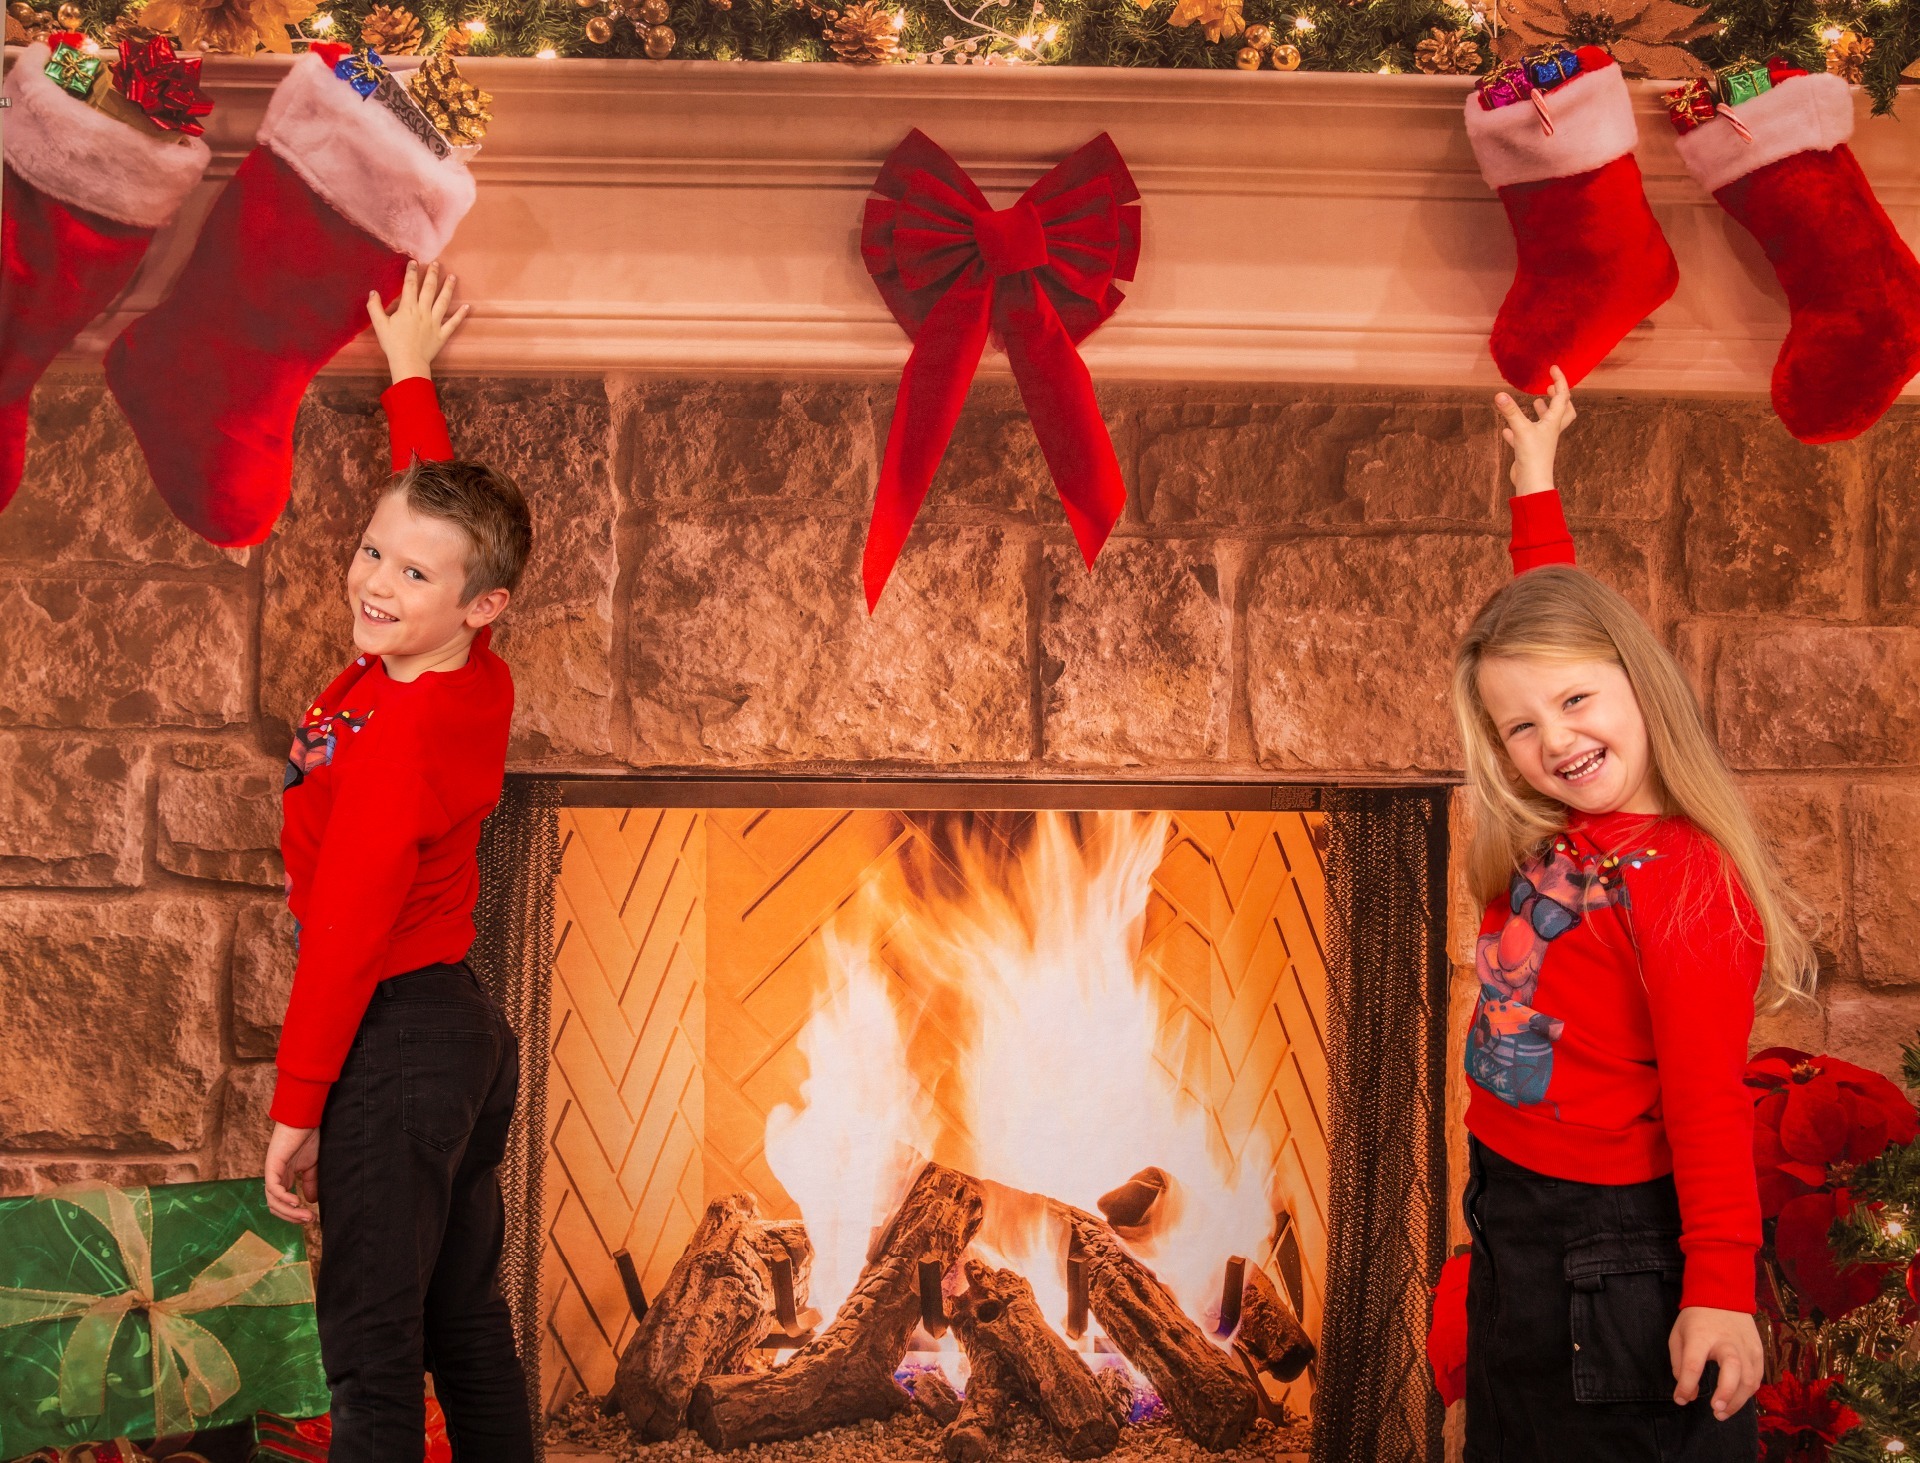 Fun Christmas sibling sessions - perfect for Christmas cards